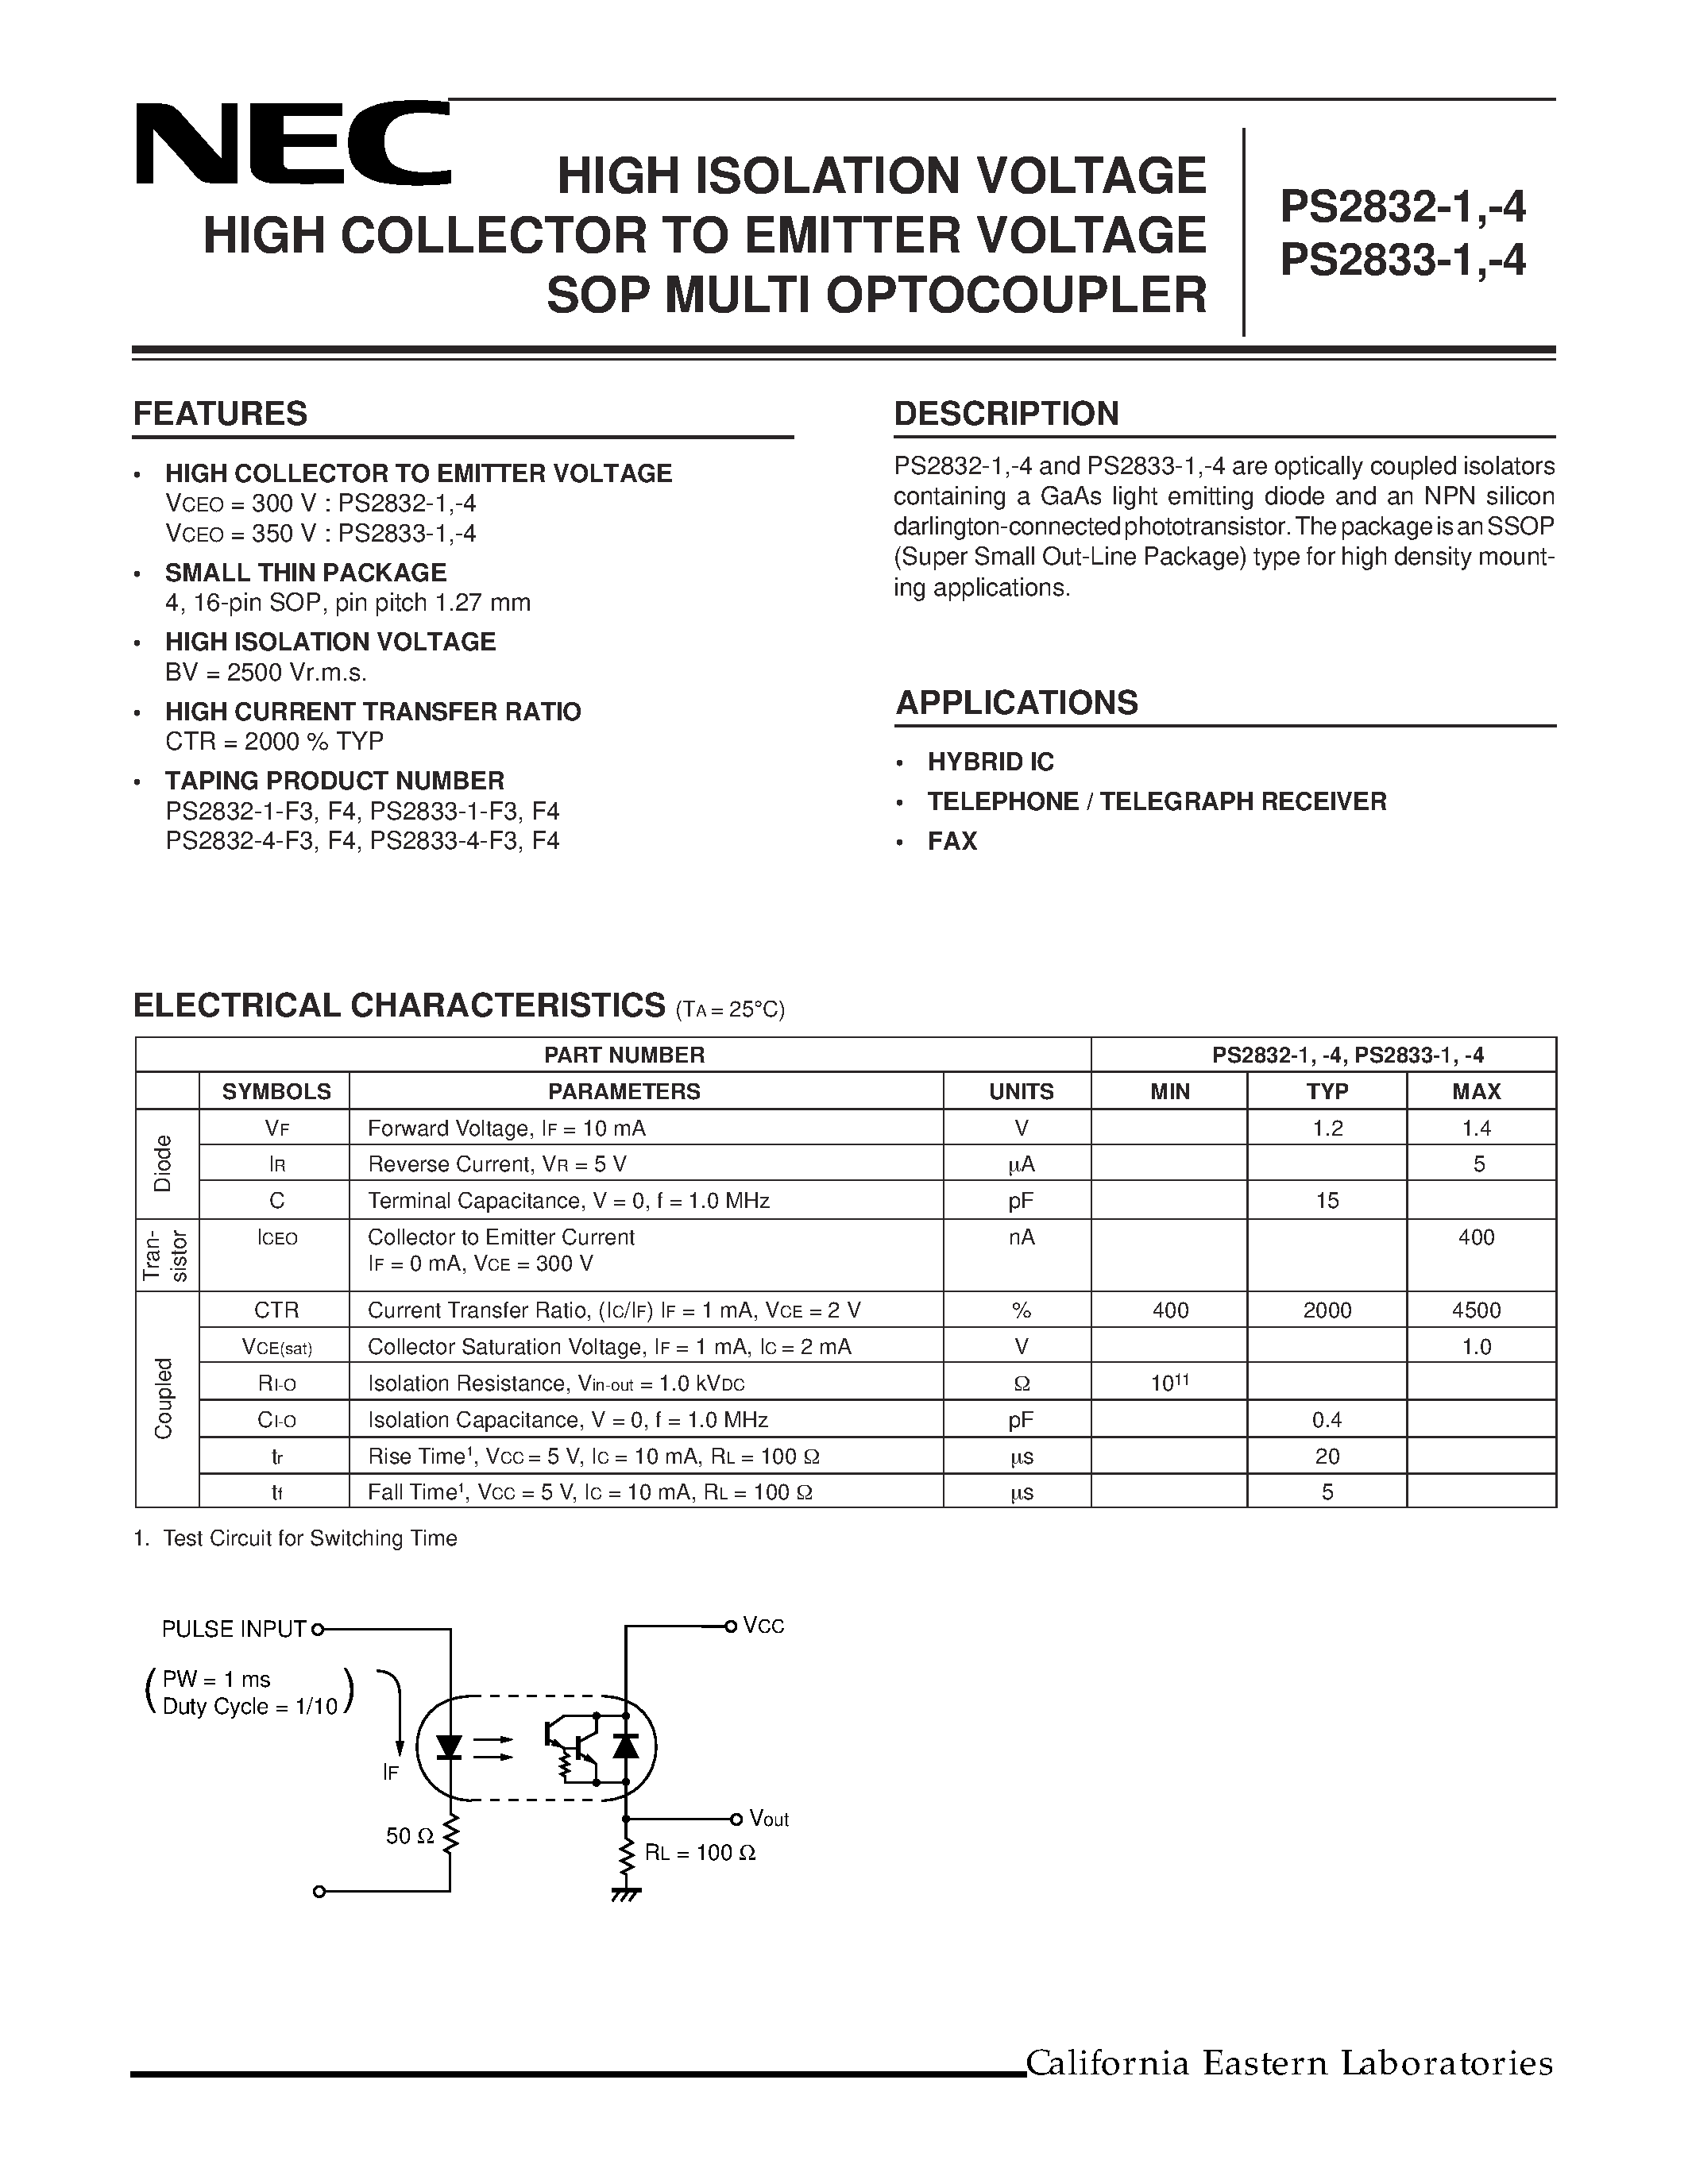 Datasheet PS2833-1-V-F4 - HIGH ISOLATION VOLTAGE HIGH COLLECTOR TO EMITTER VOLTAGE SOP MULTI OPTOCOUPLER page 1